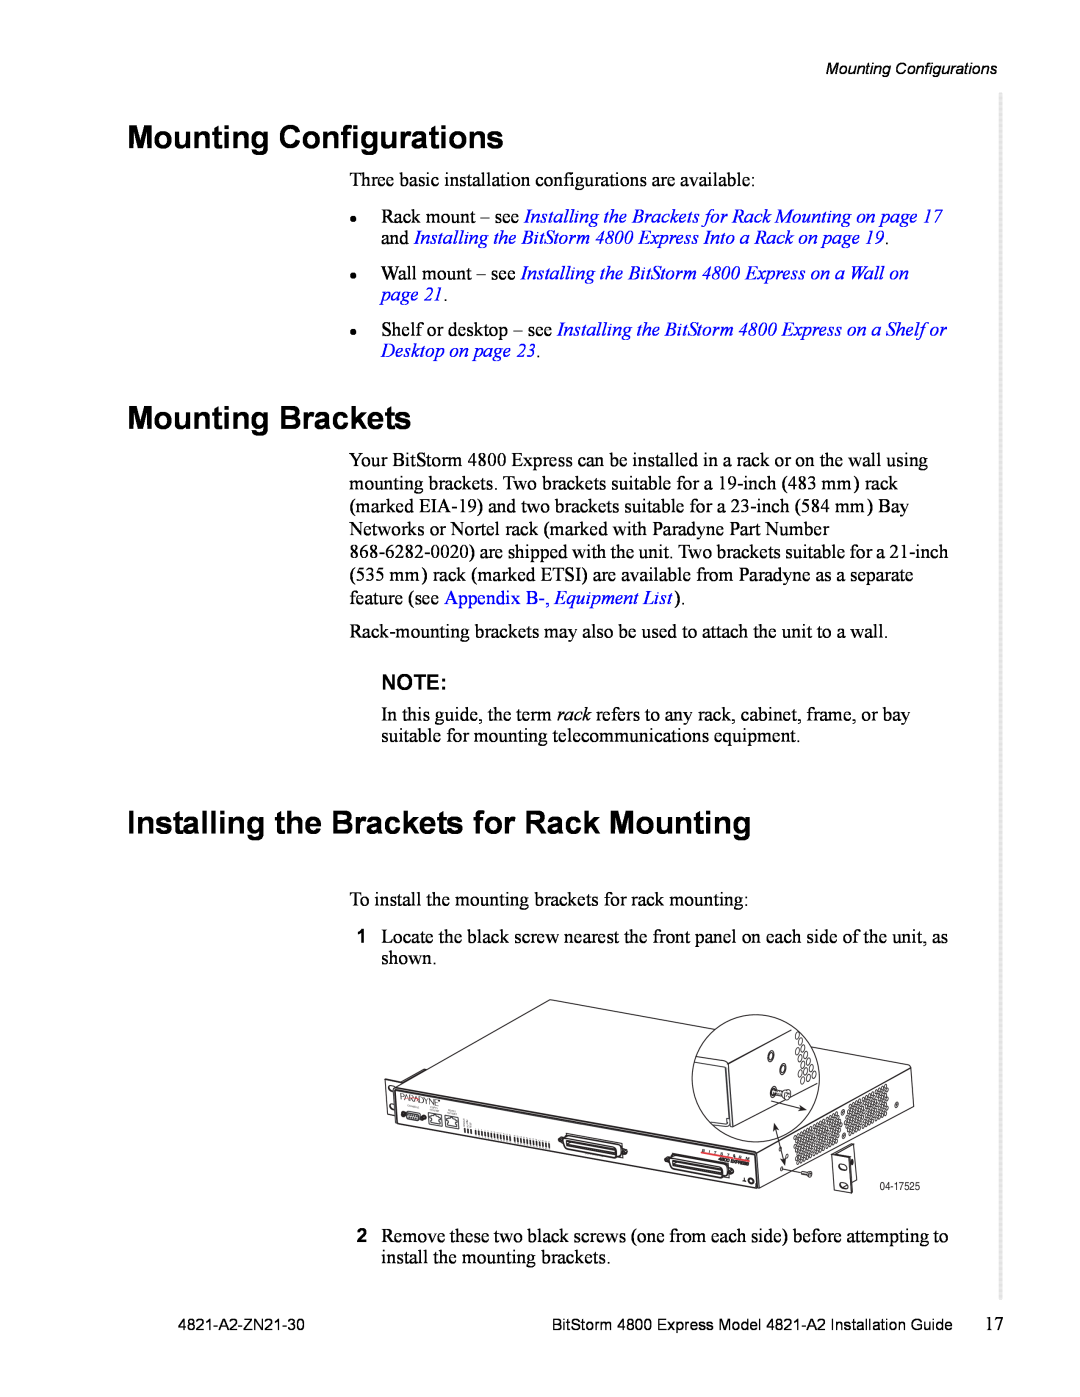 Zhone Technologies 4821-A2 Mounting Brackets, Mounting Configurations, Installing the Brackets for Rack Mounting, z z z 